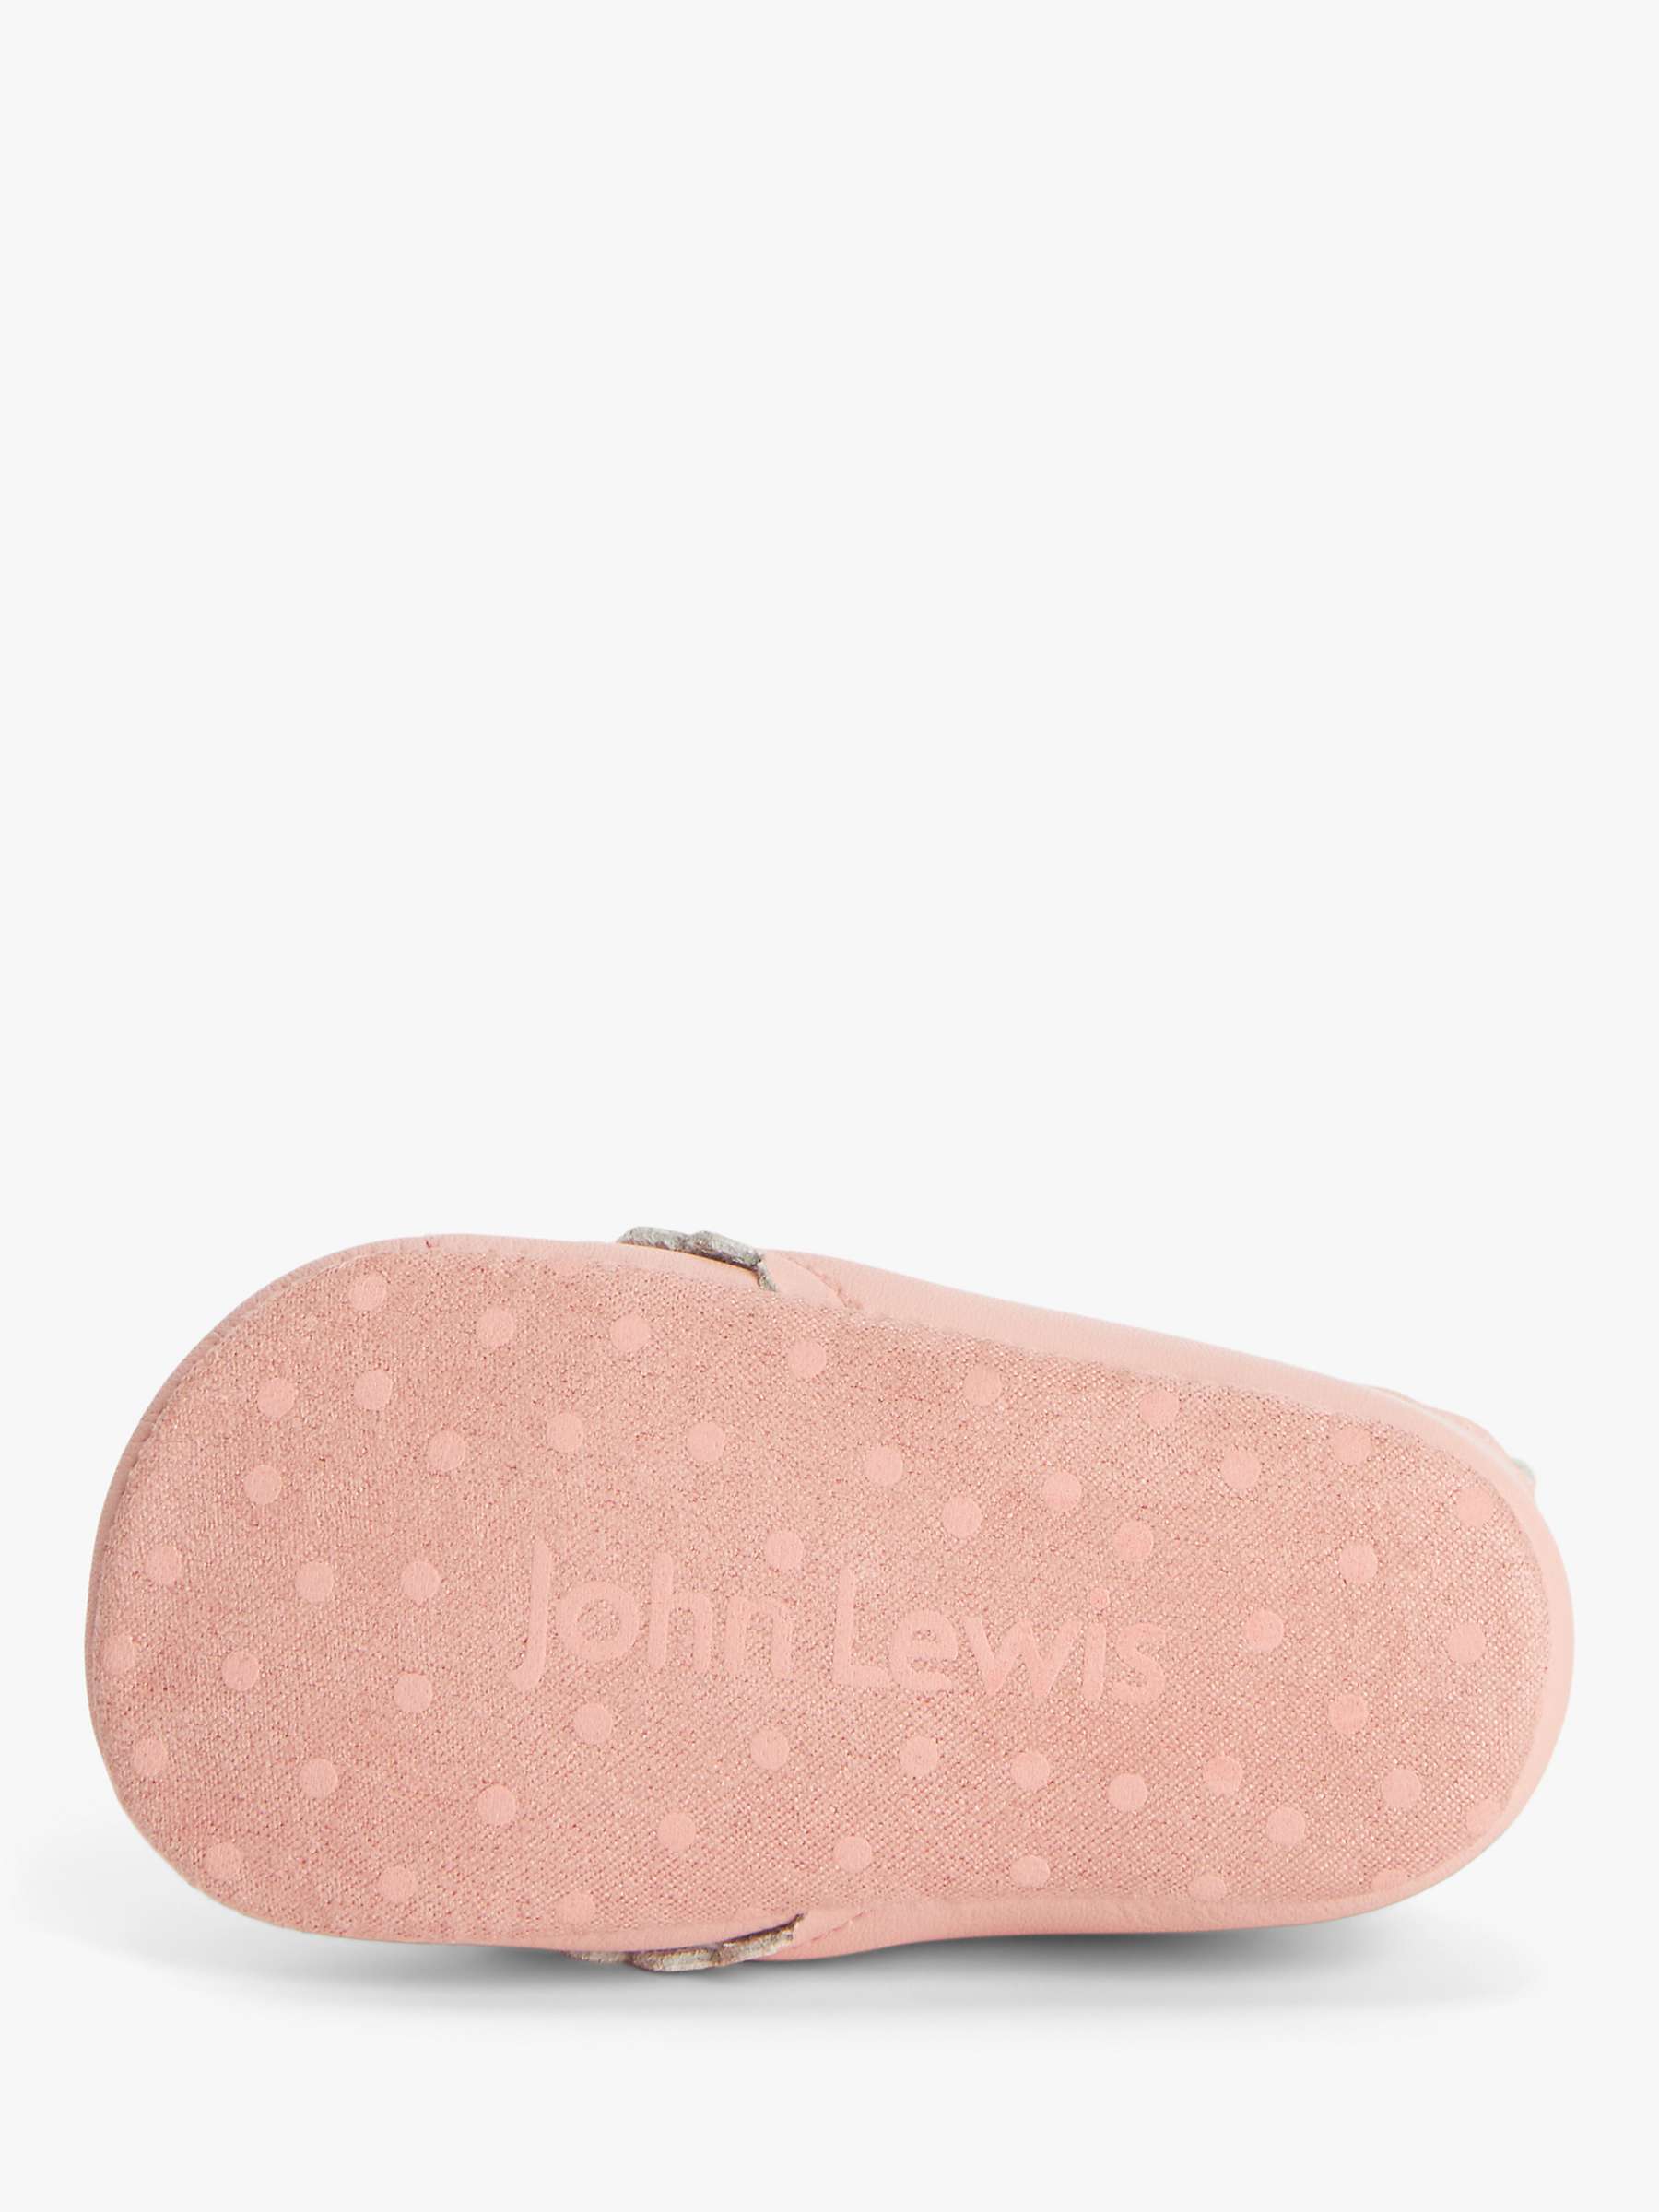 Buy John Lewis Baby Cut-Out Floral Leather Pram Shoes Online at johnlewis.com